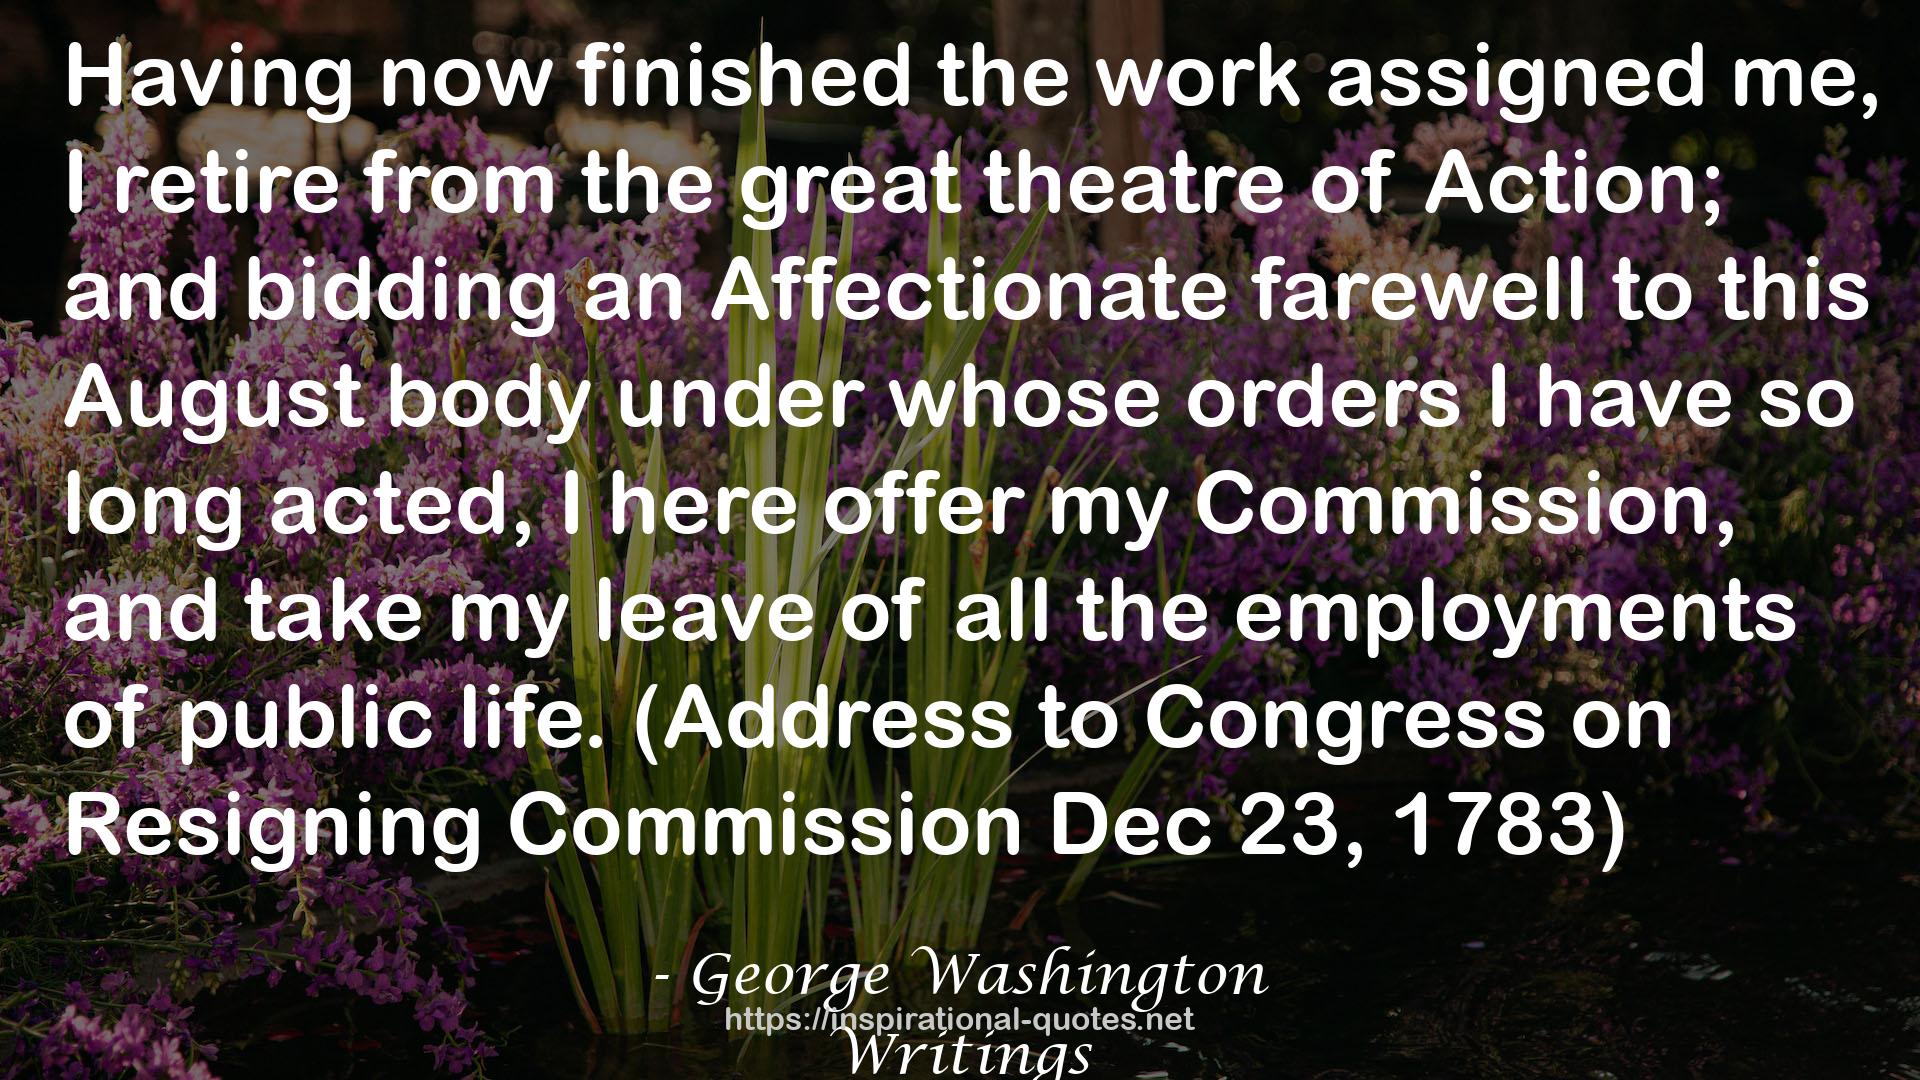 Congress on Resigning Commission  QUOTES